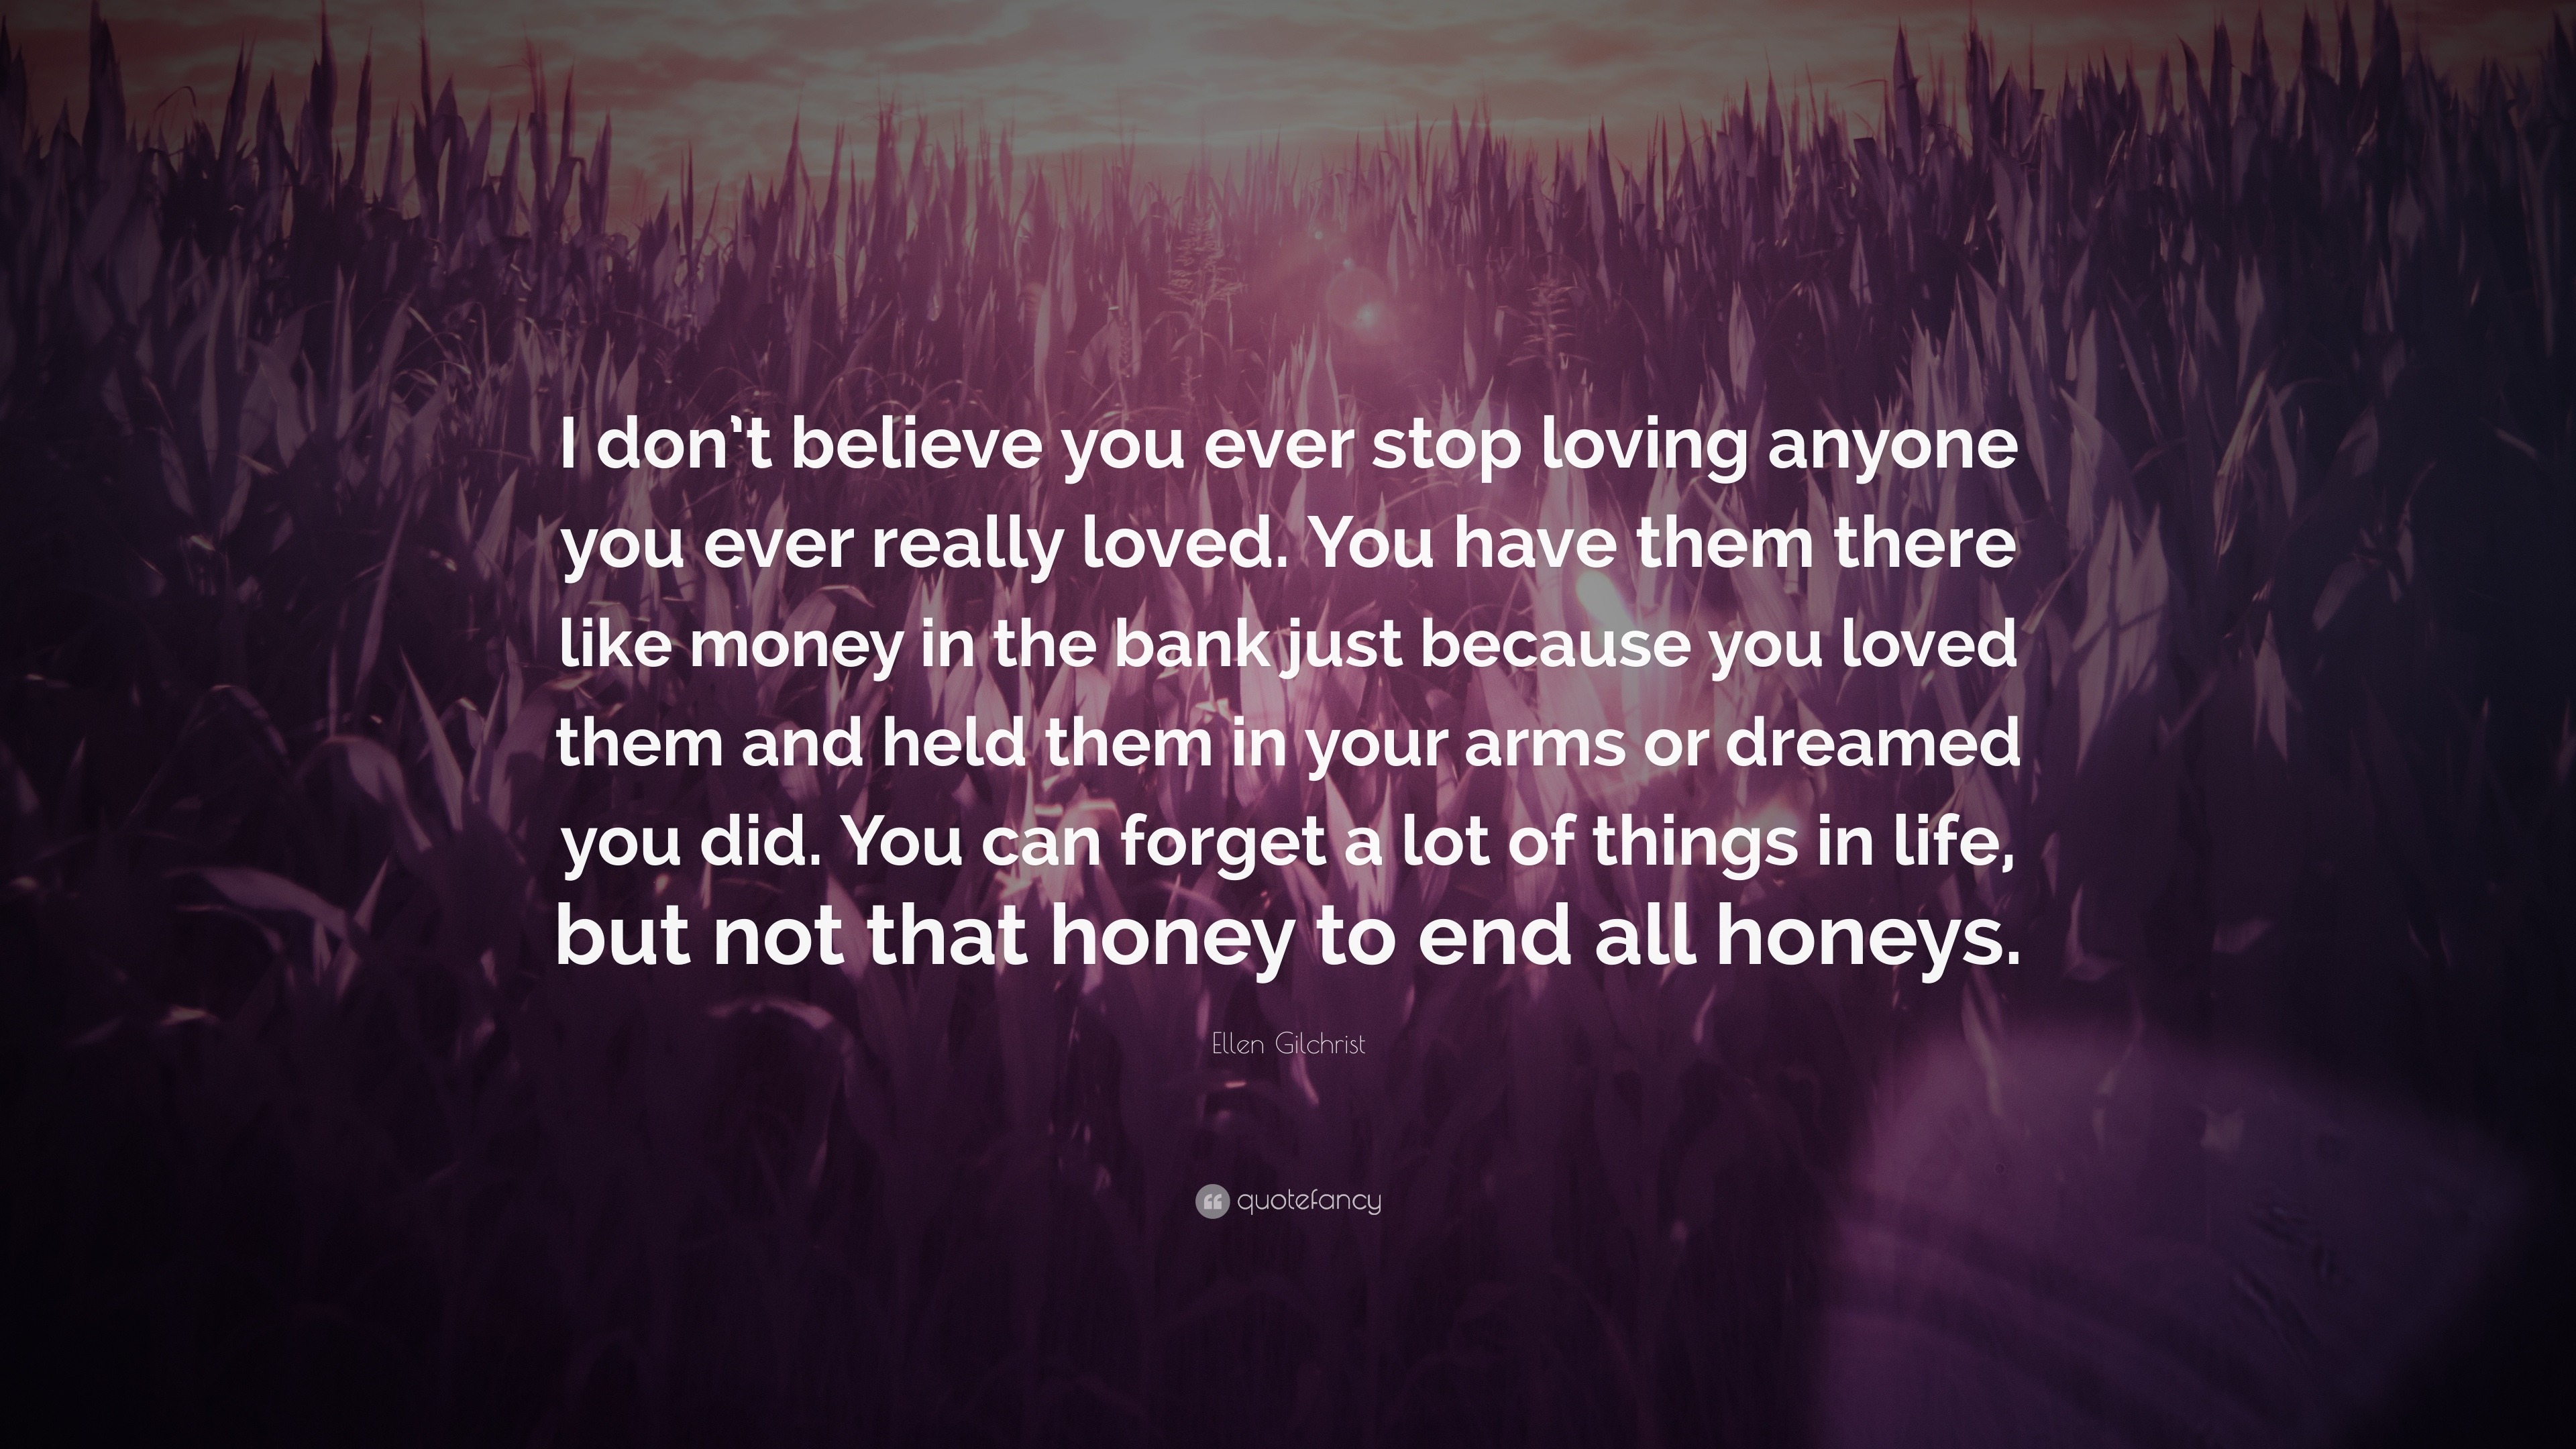 Ellen Gilchrist Quote: “I don’t believe you ever stop loving anyone you